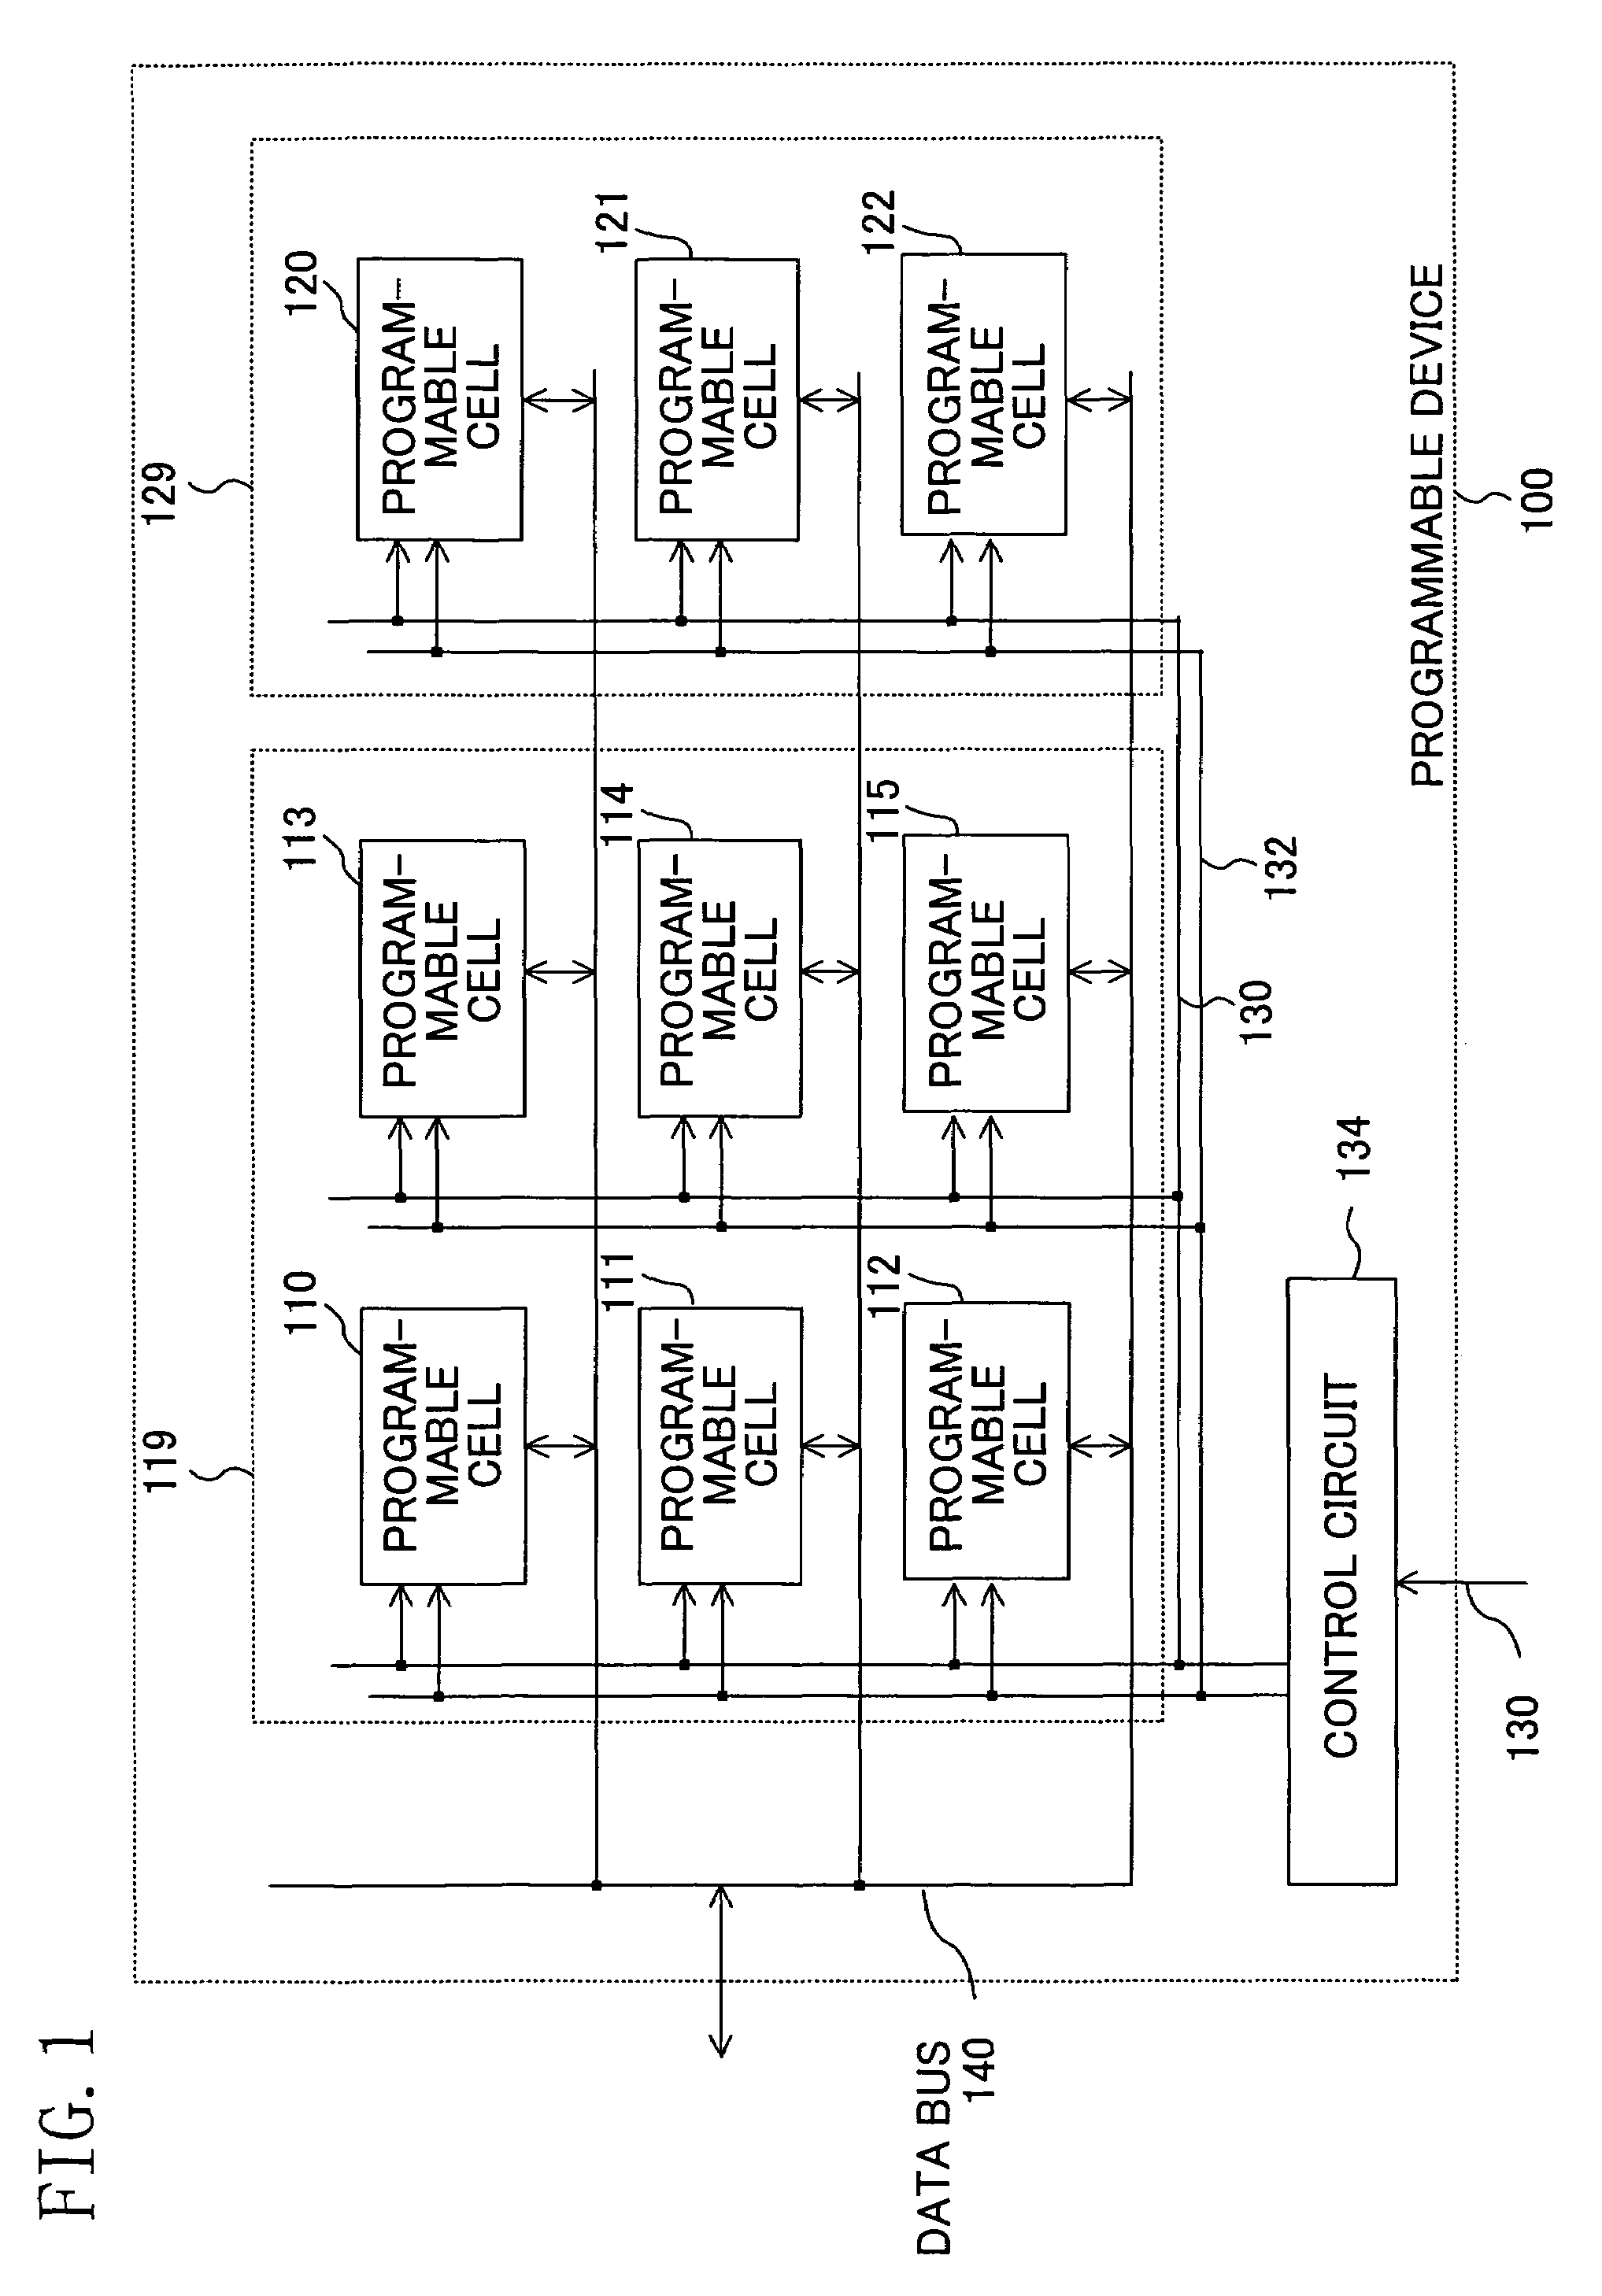 Programmable device with structure for storing configuration information